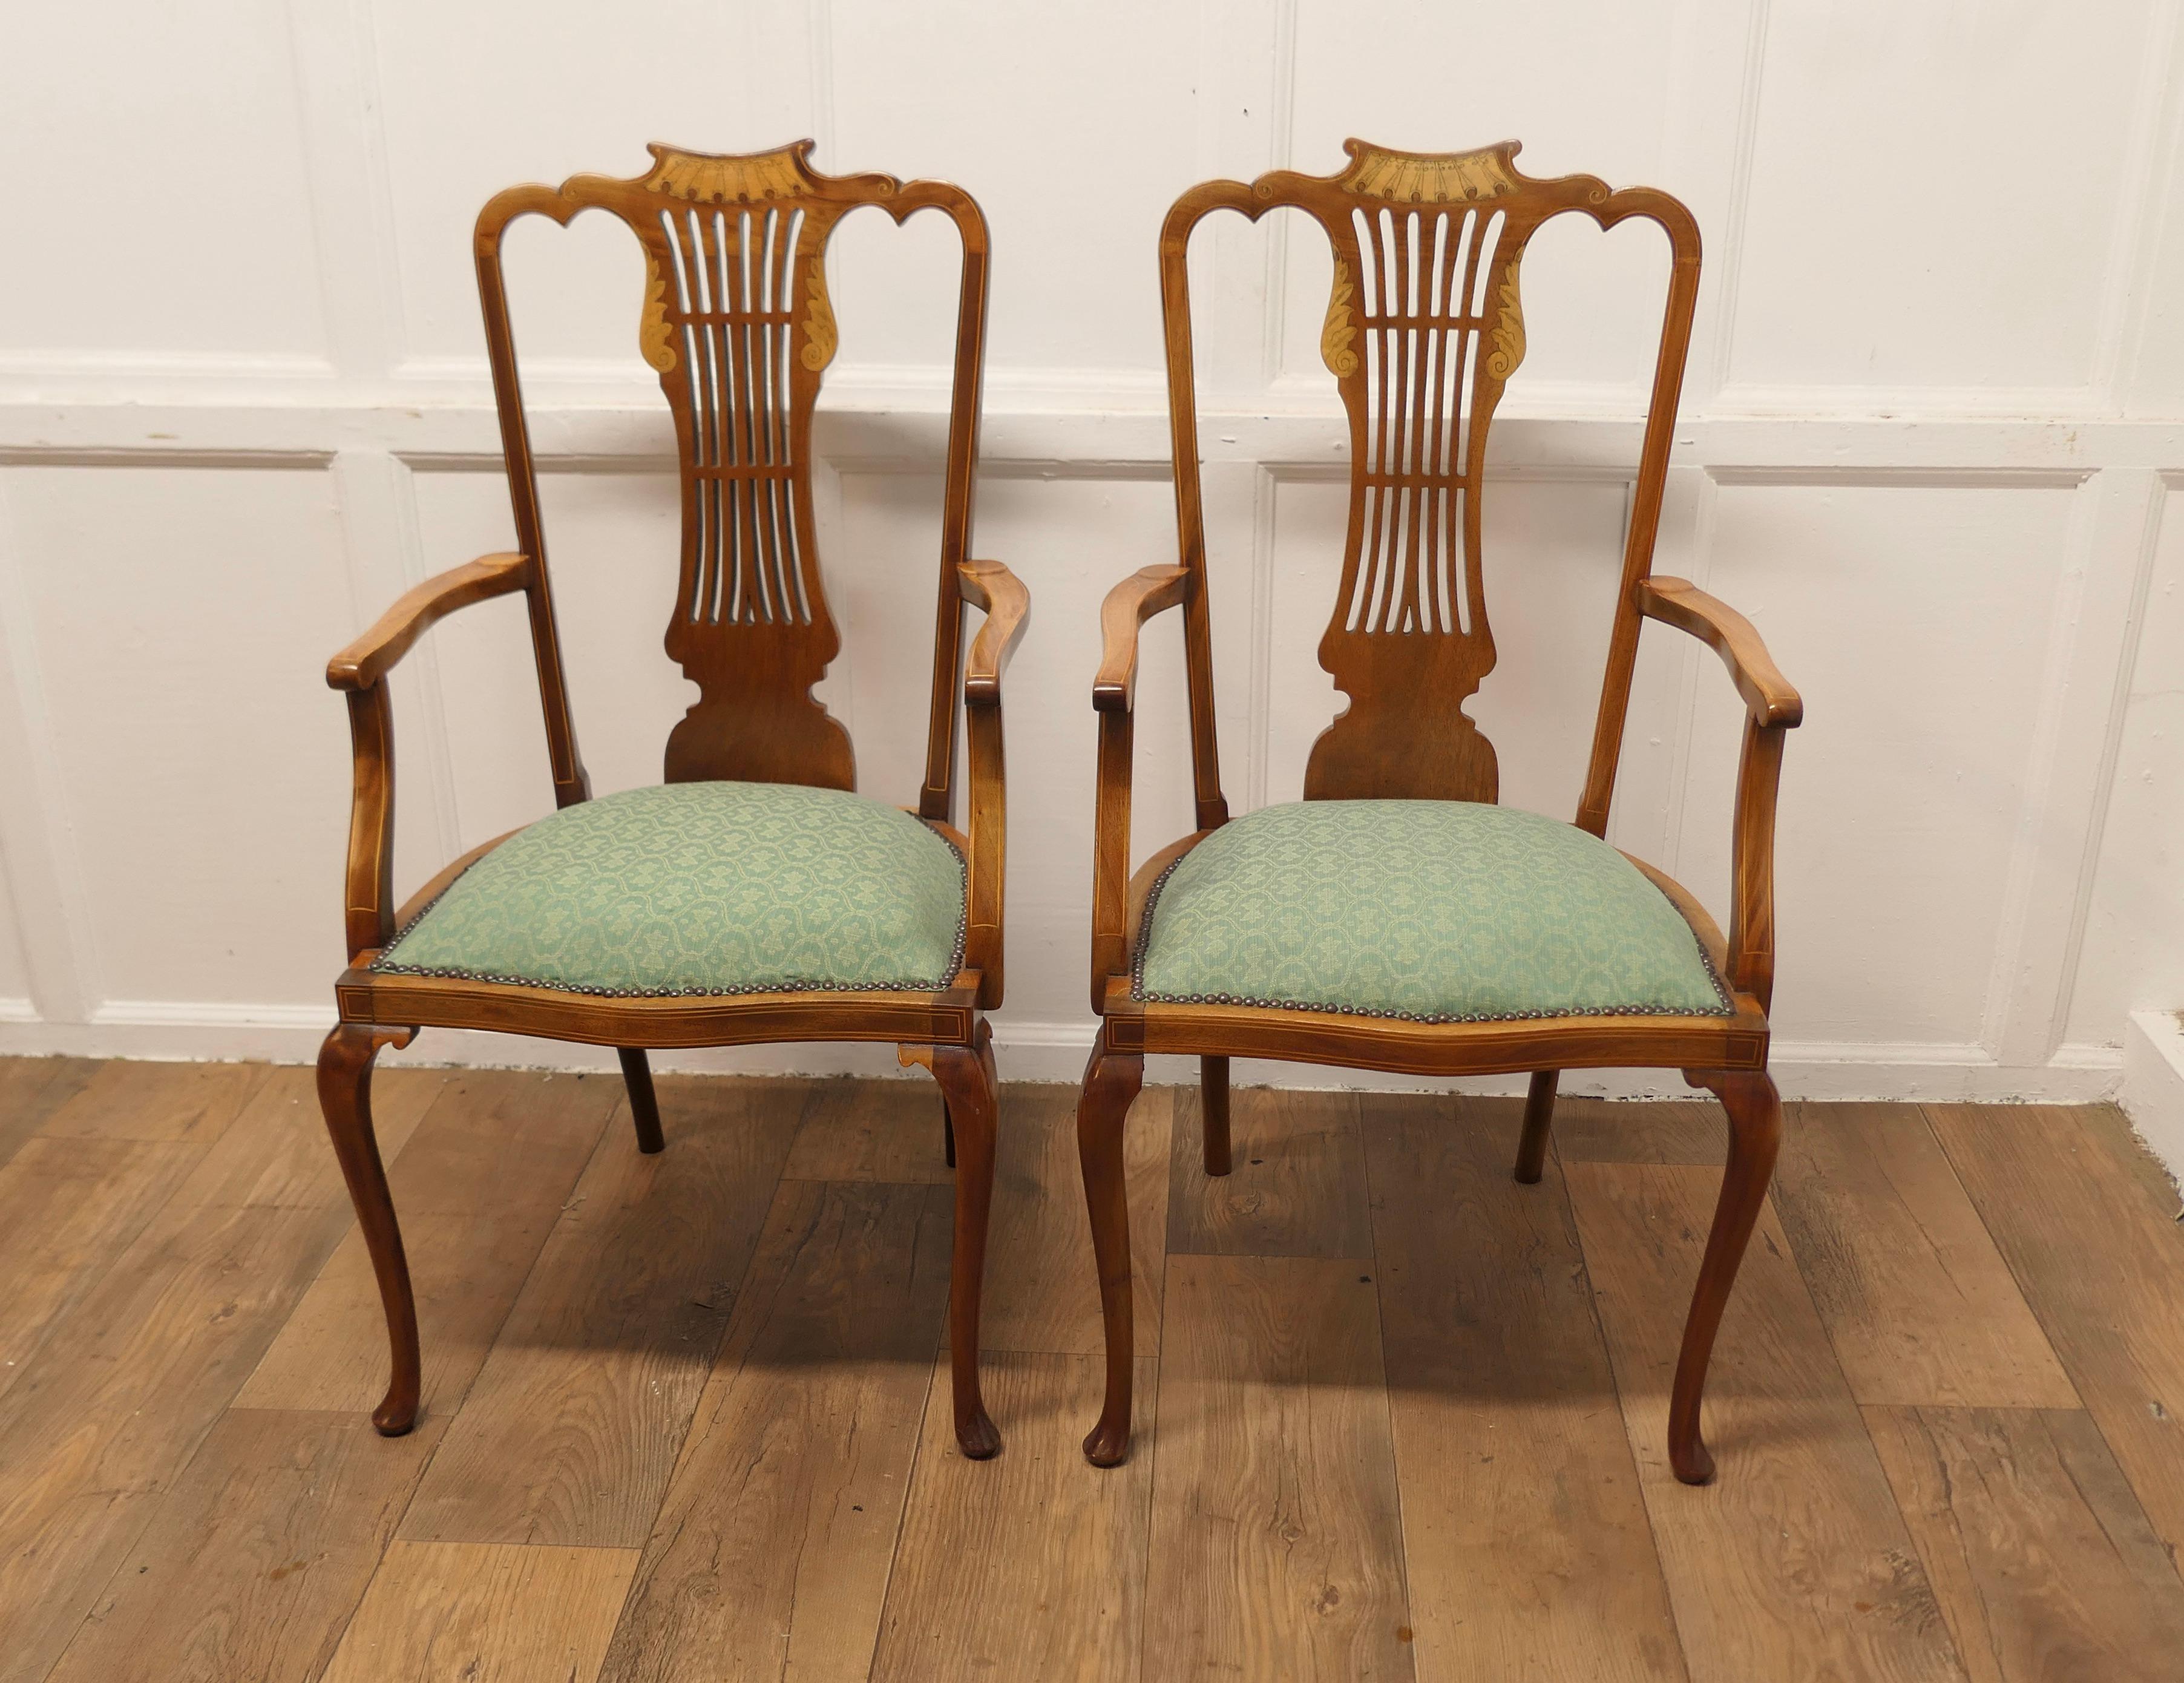 A Pair of Elegant Edwardian Upholstered  Arm Chairs 

This is a very handsome pair of Edwardian chairs, the chairs have aesthetic movement pierced and decorated backs
The chairs are made in a light coloured walnut and have a scroll decoration